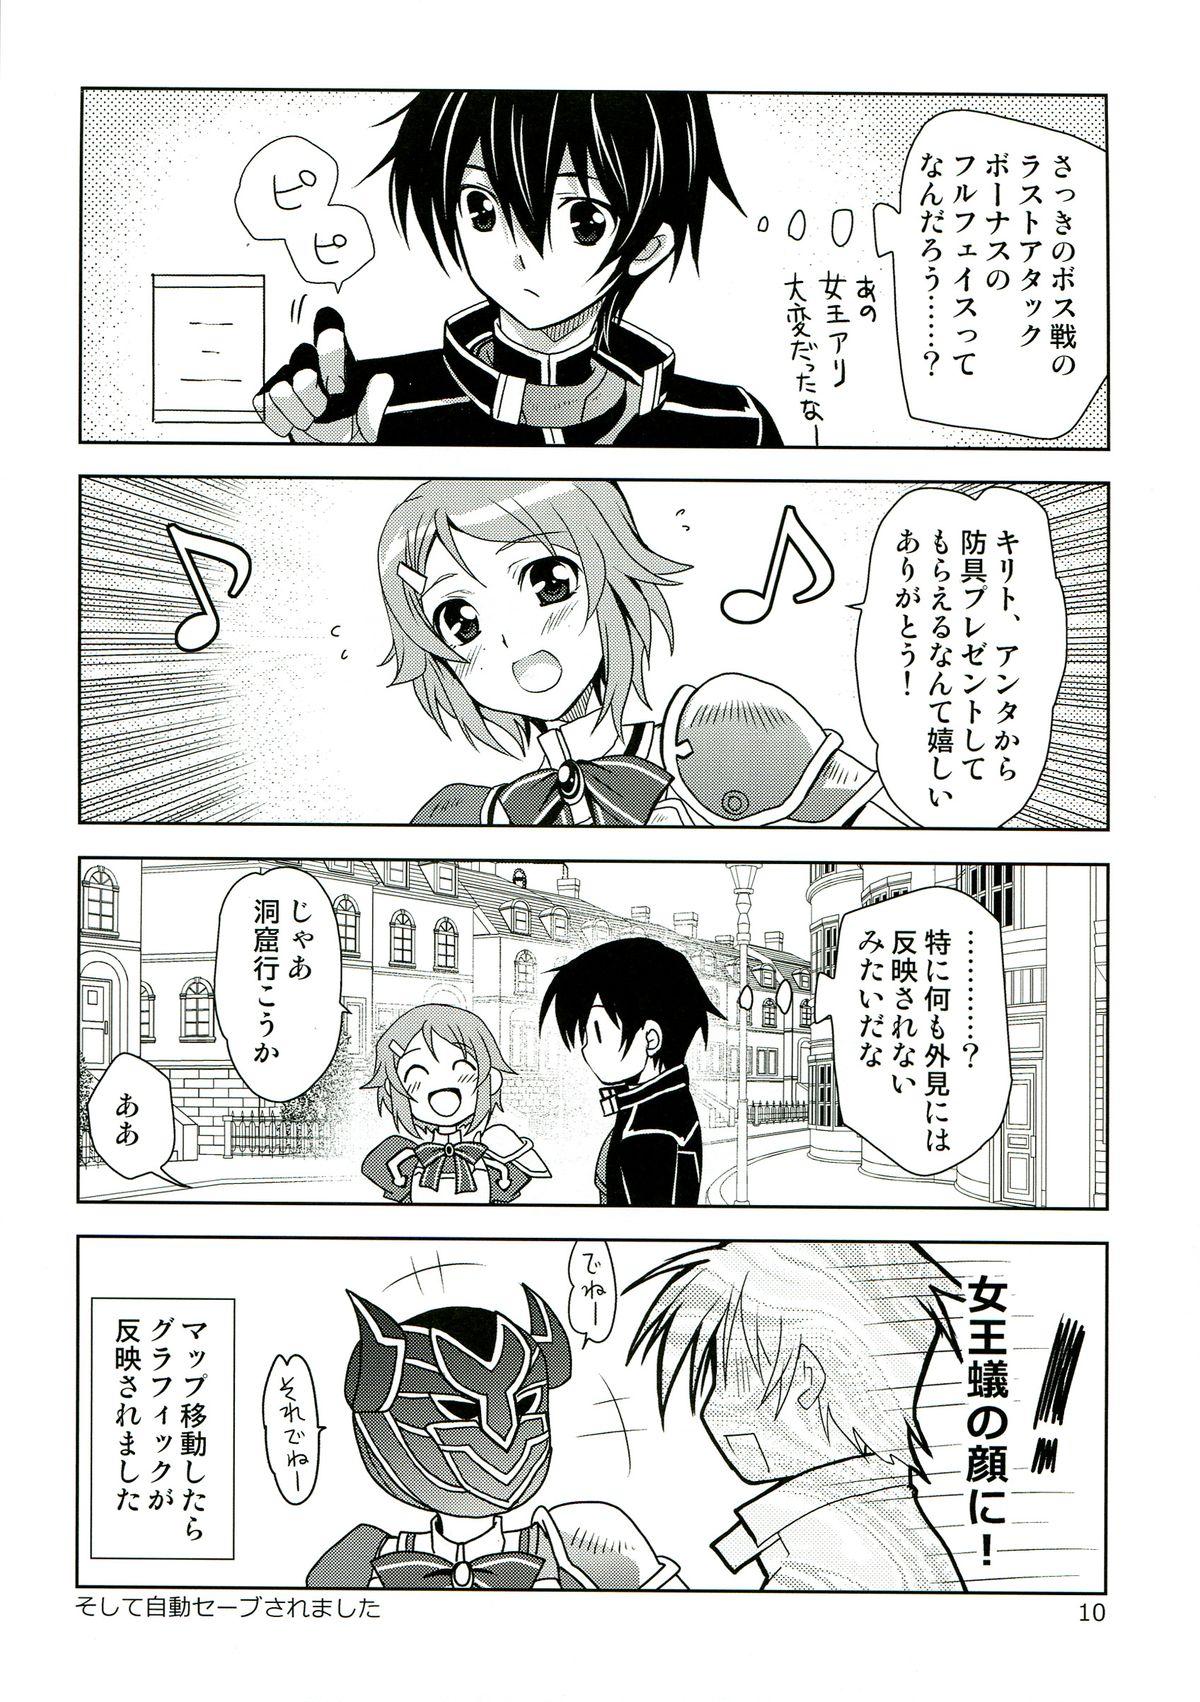 Edging ONE MORE LOVE - Sword art online Married - Page 10